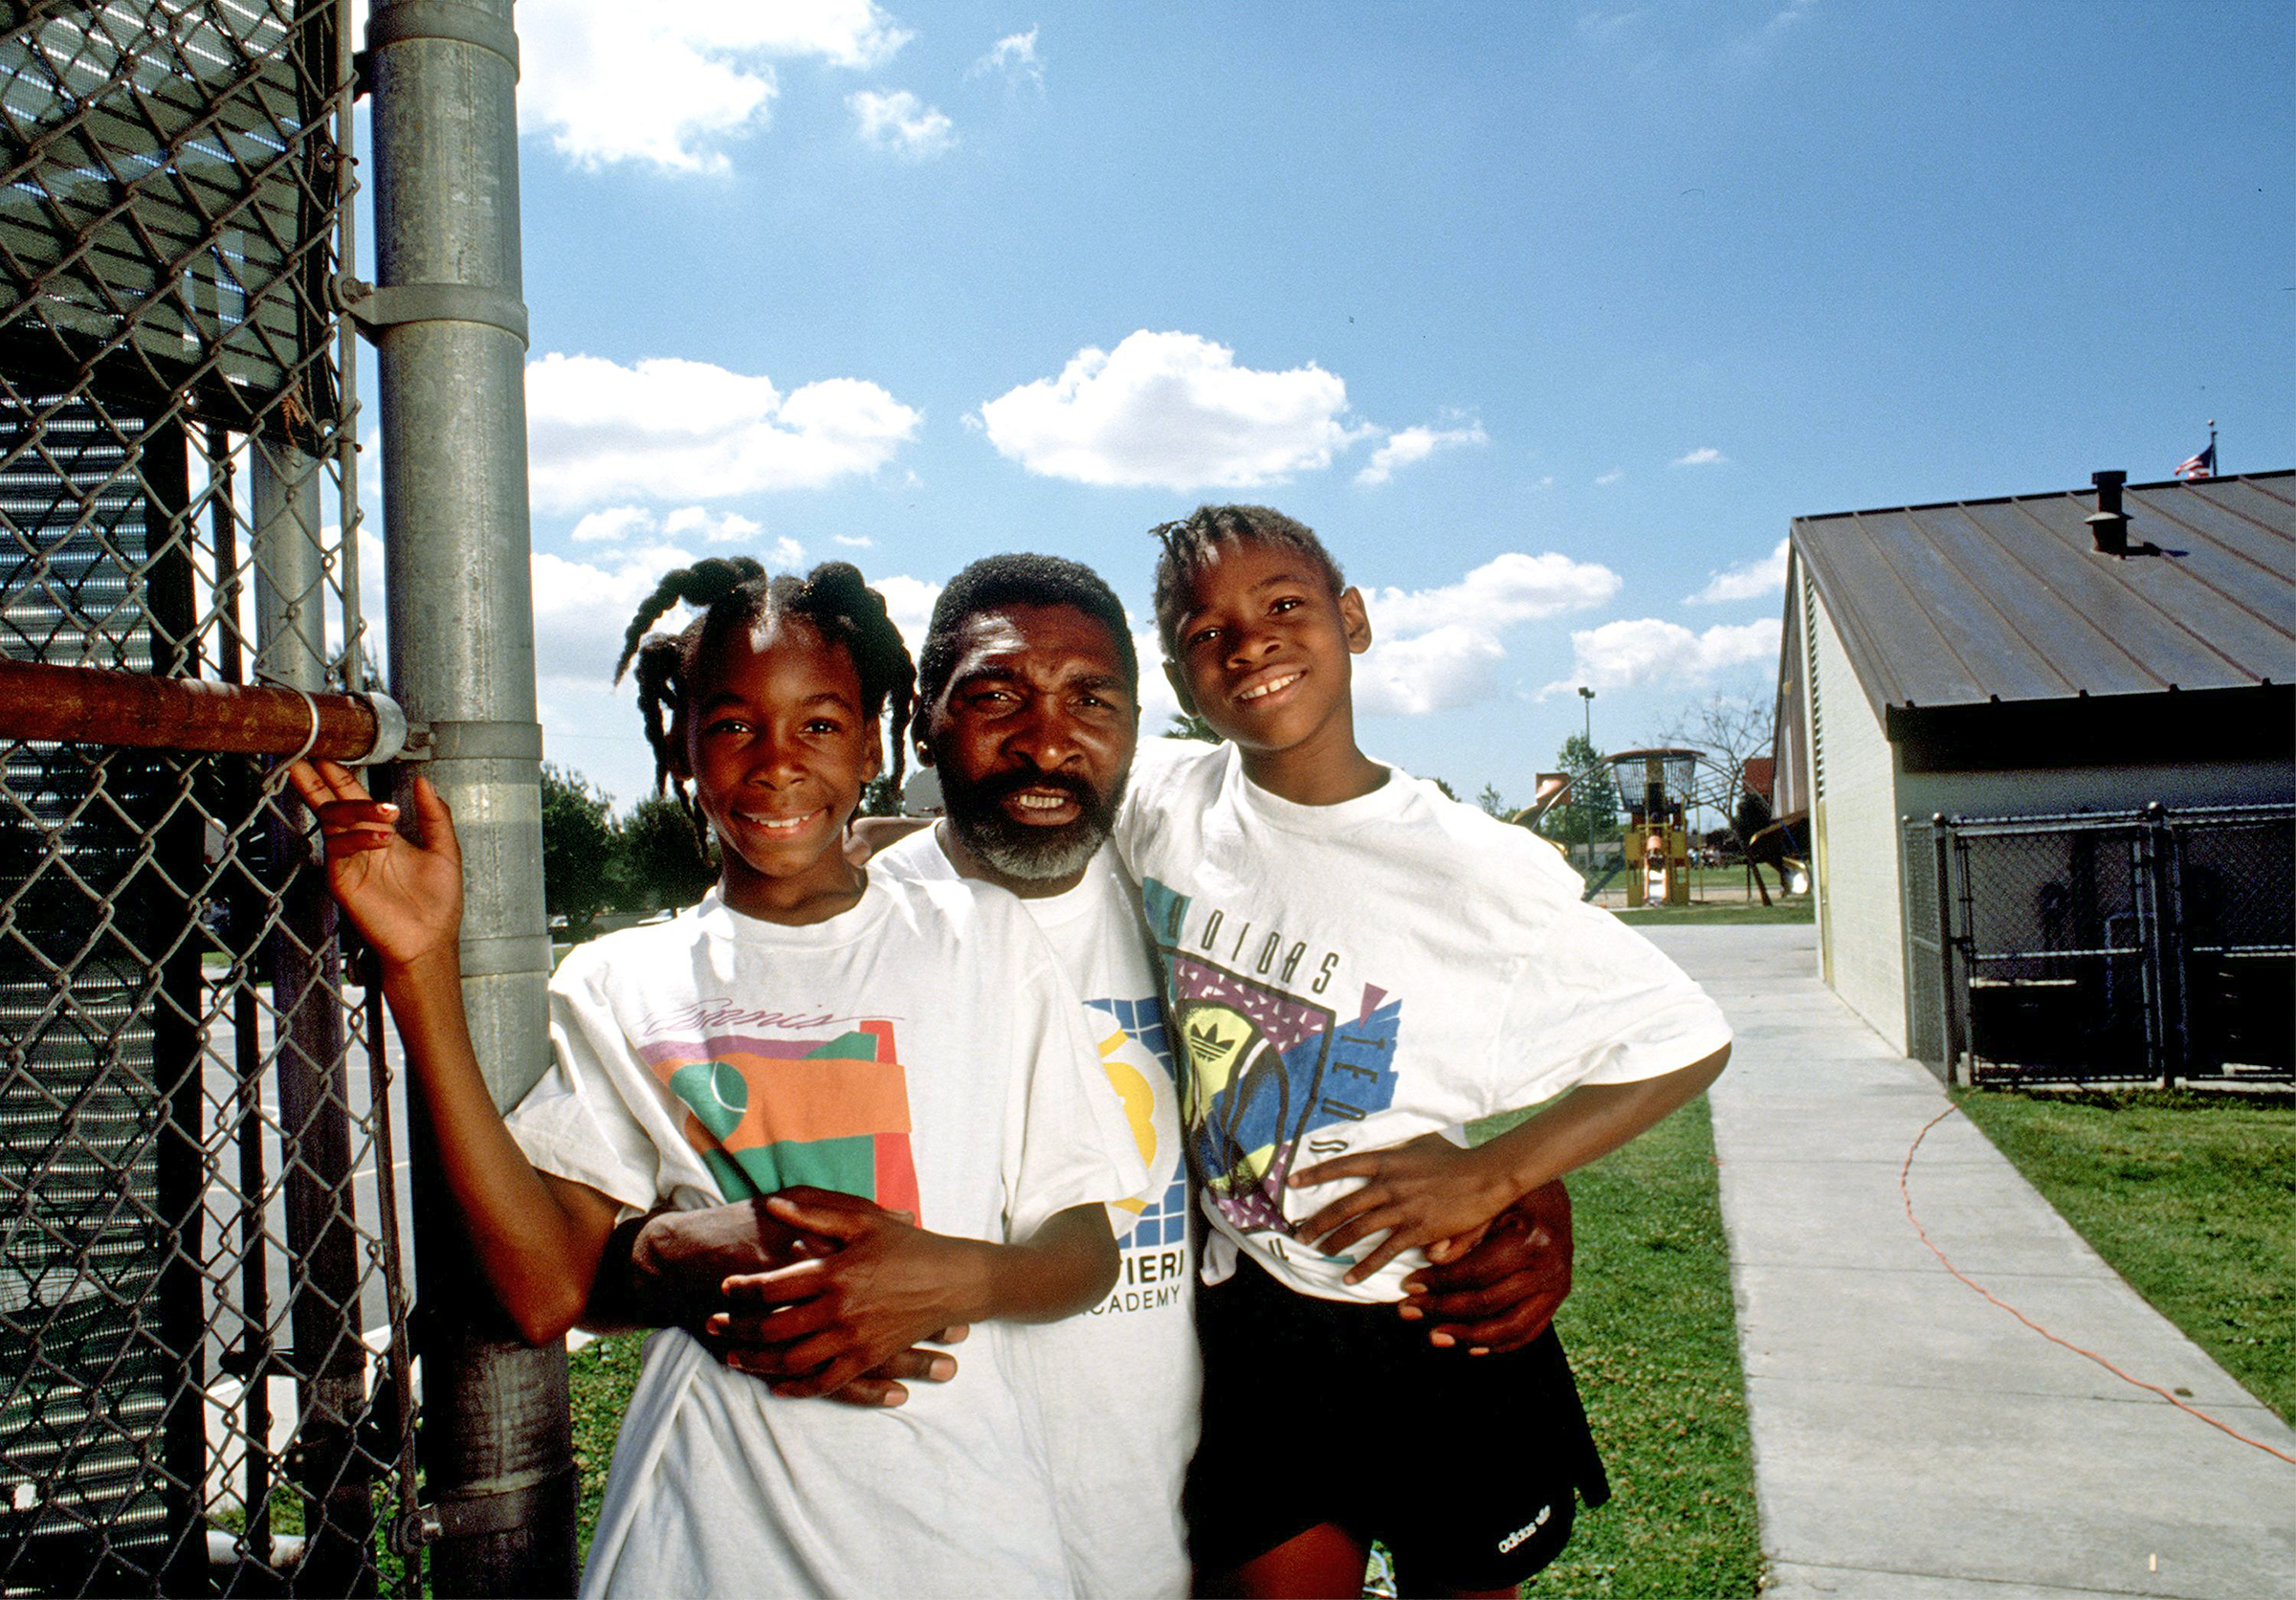 Richard Williams, center, with his daughters Venus, left, and Serena in Compton, CA in 1991. (Paul Harris—Getty Images)